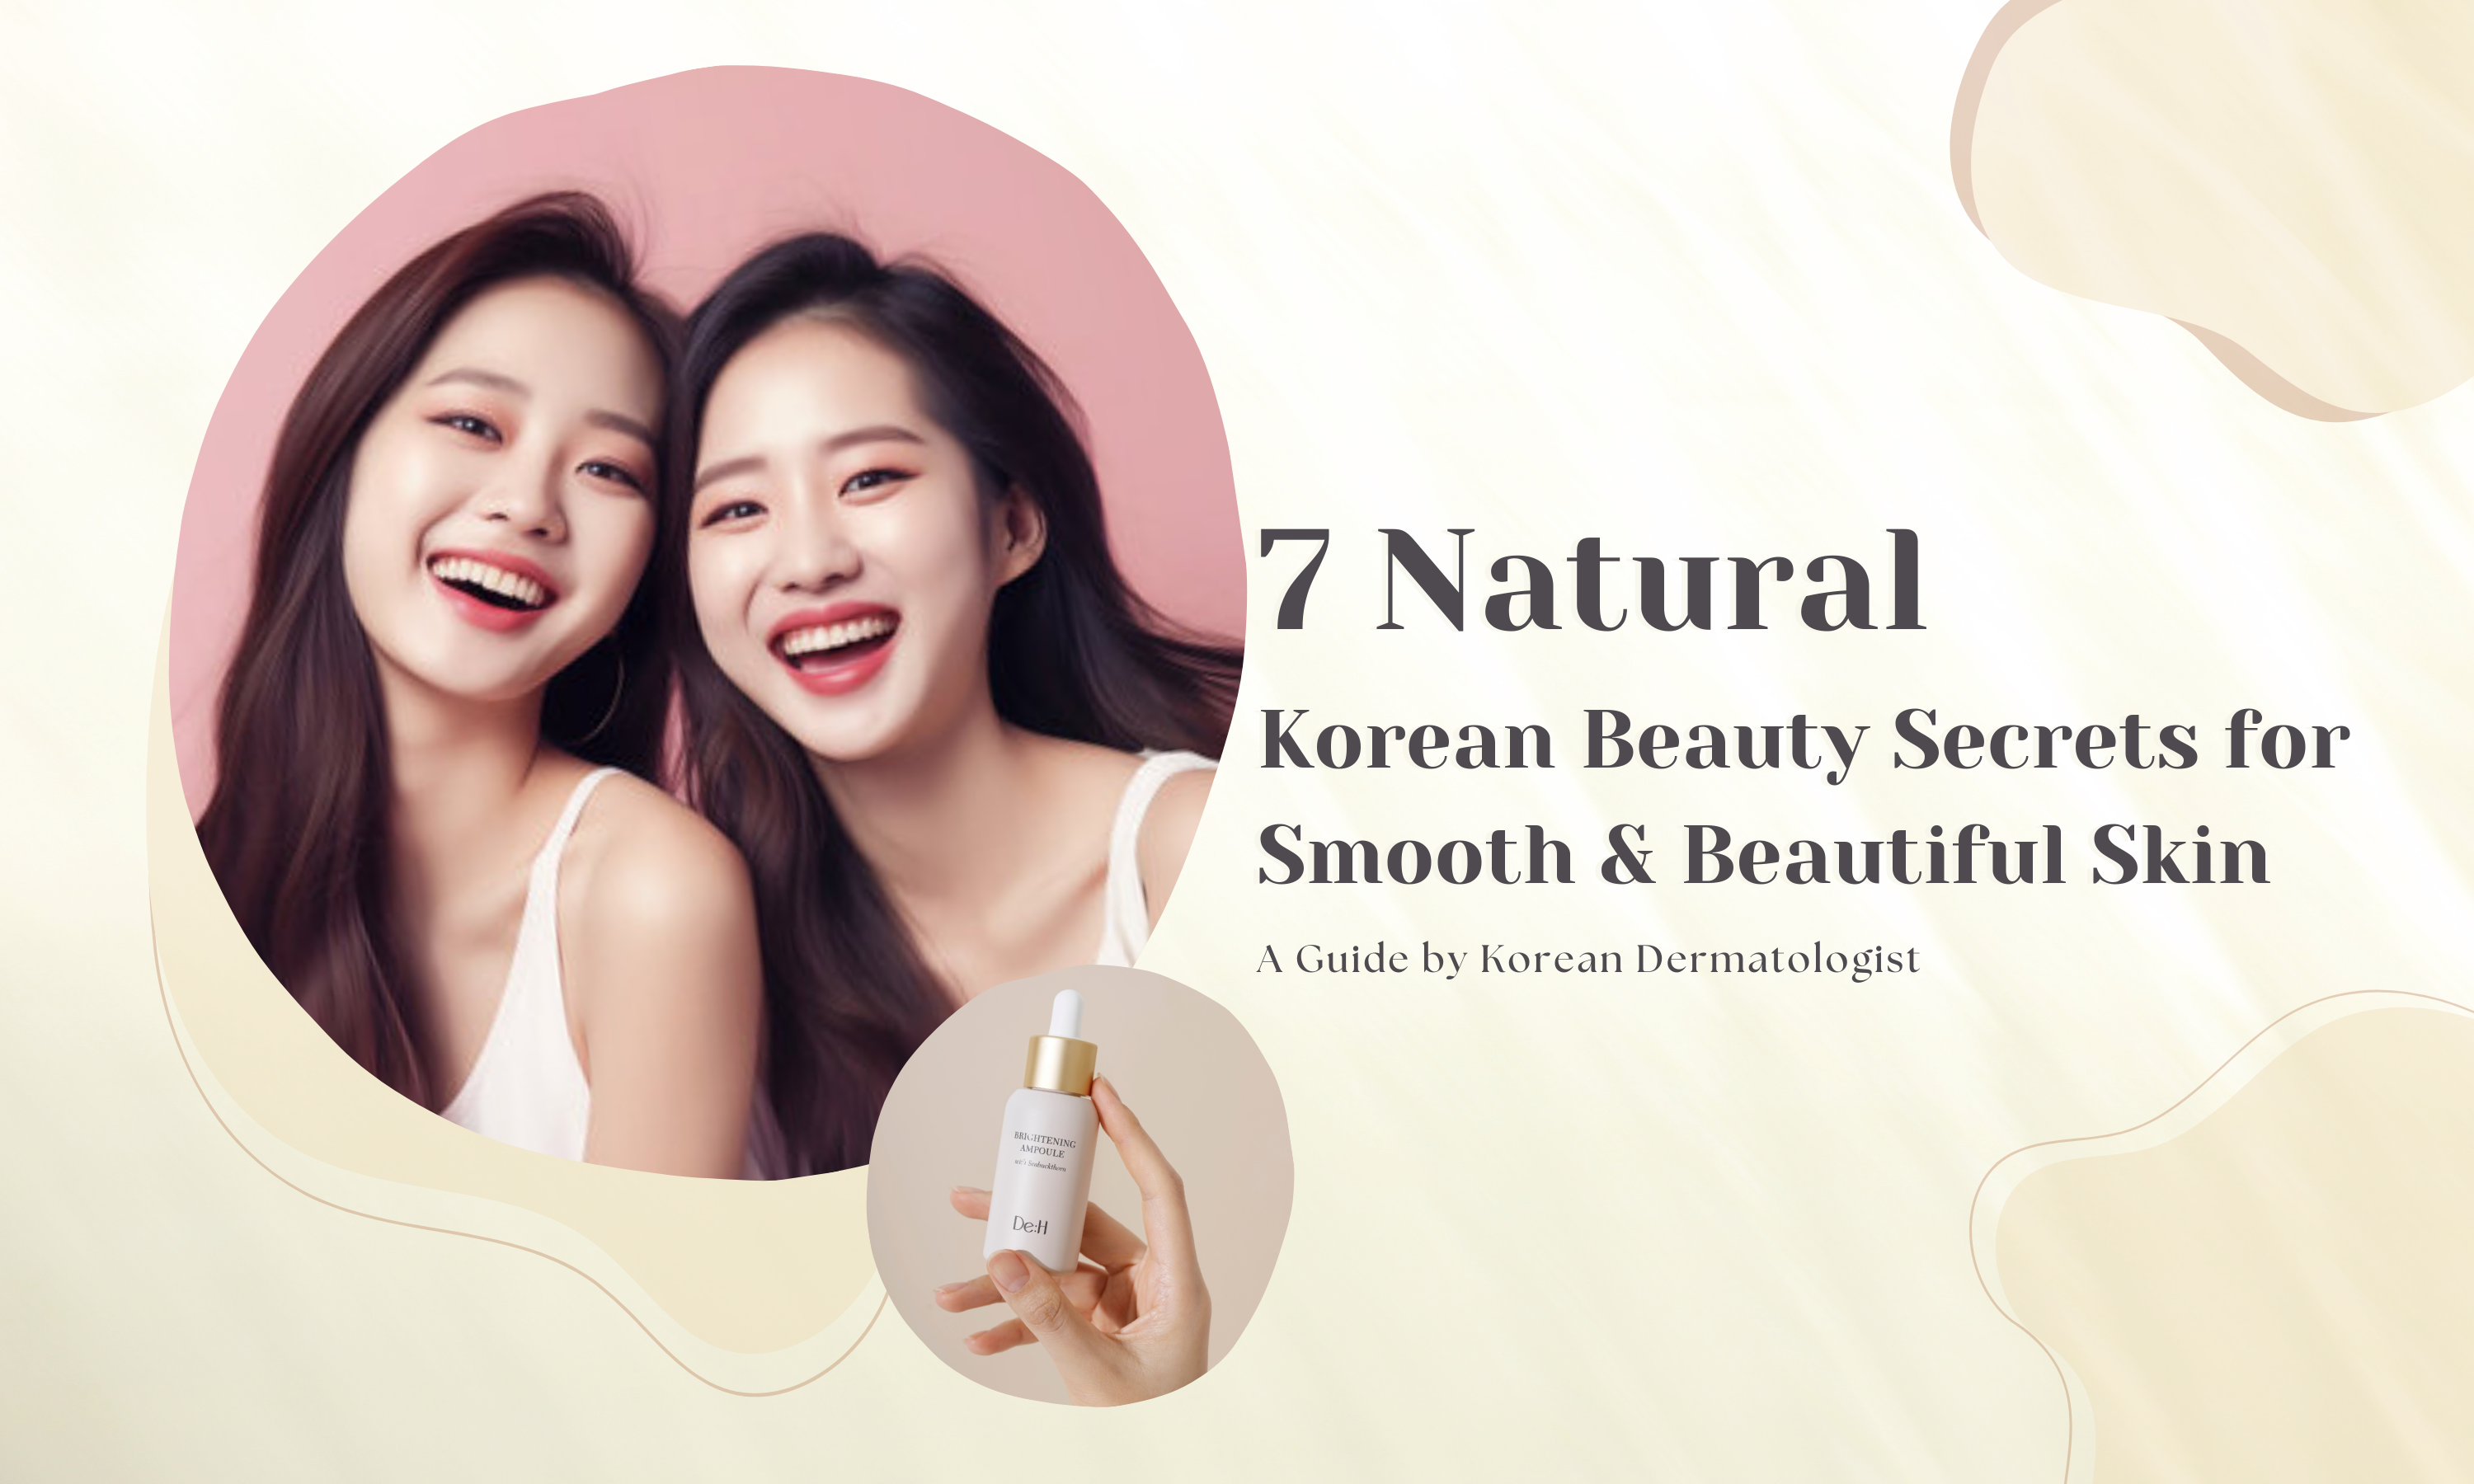 7 Natural Ways To Maintain Smooth & Beautiful Skin - A Korean Health & Beauty Guide